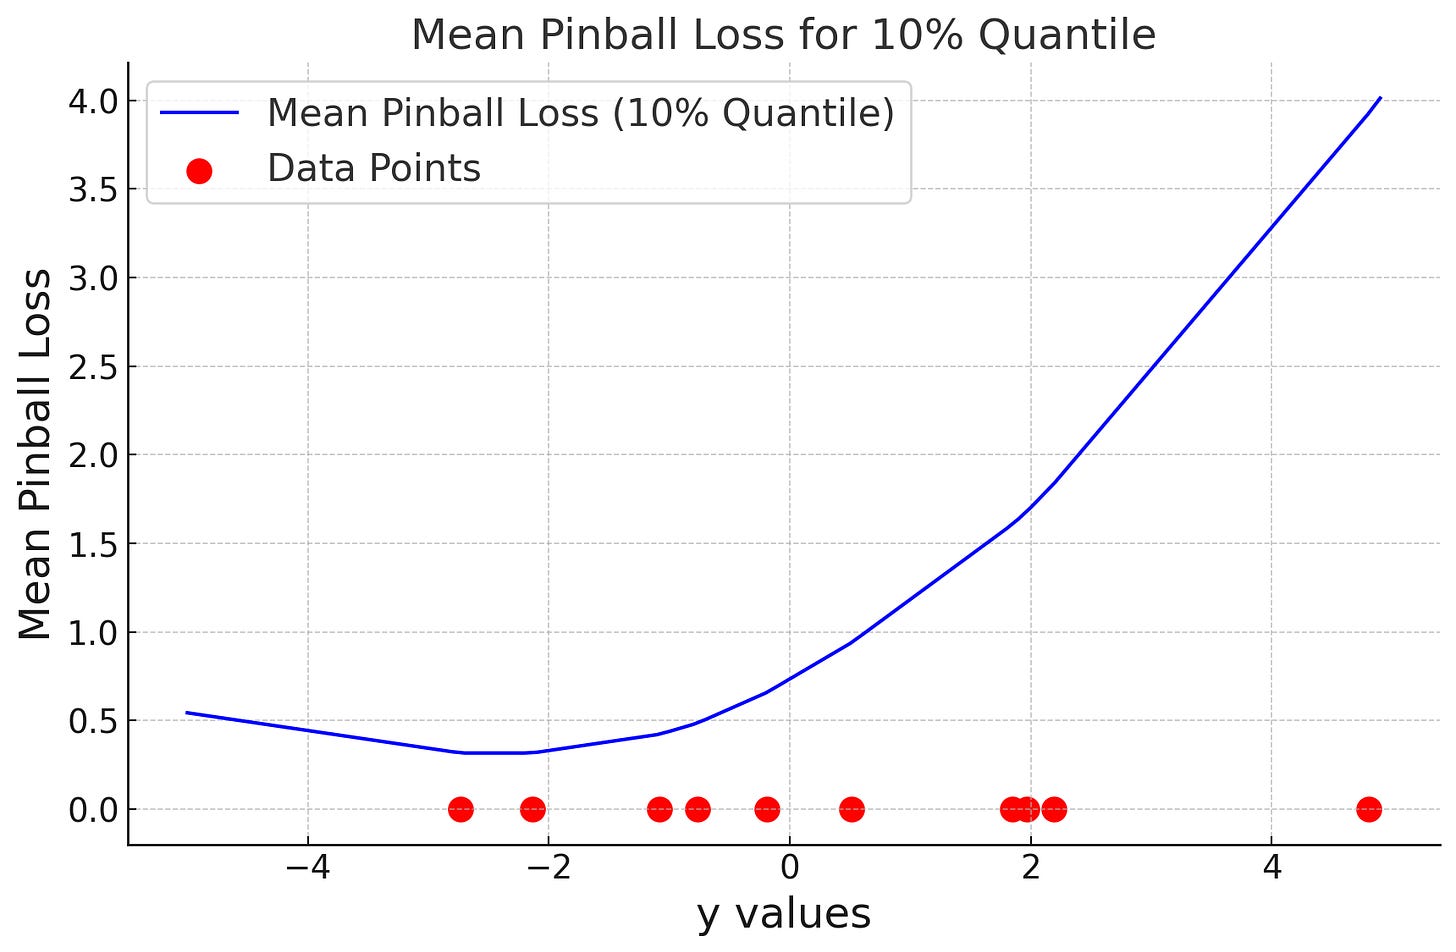 A plot. On the x-axis are the ground truth values, on the y-axis is the mean pinball loss. 10 dots are plotted along the x-axis. the pinball loss is lowest between points 1 and 2.